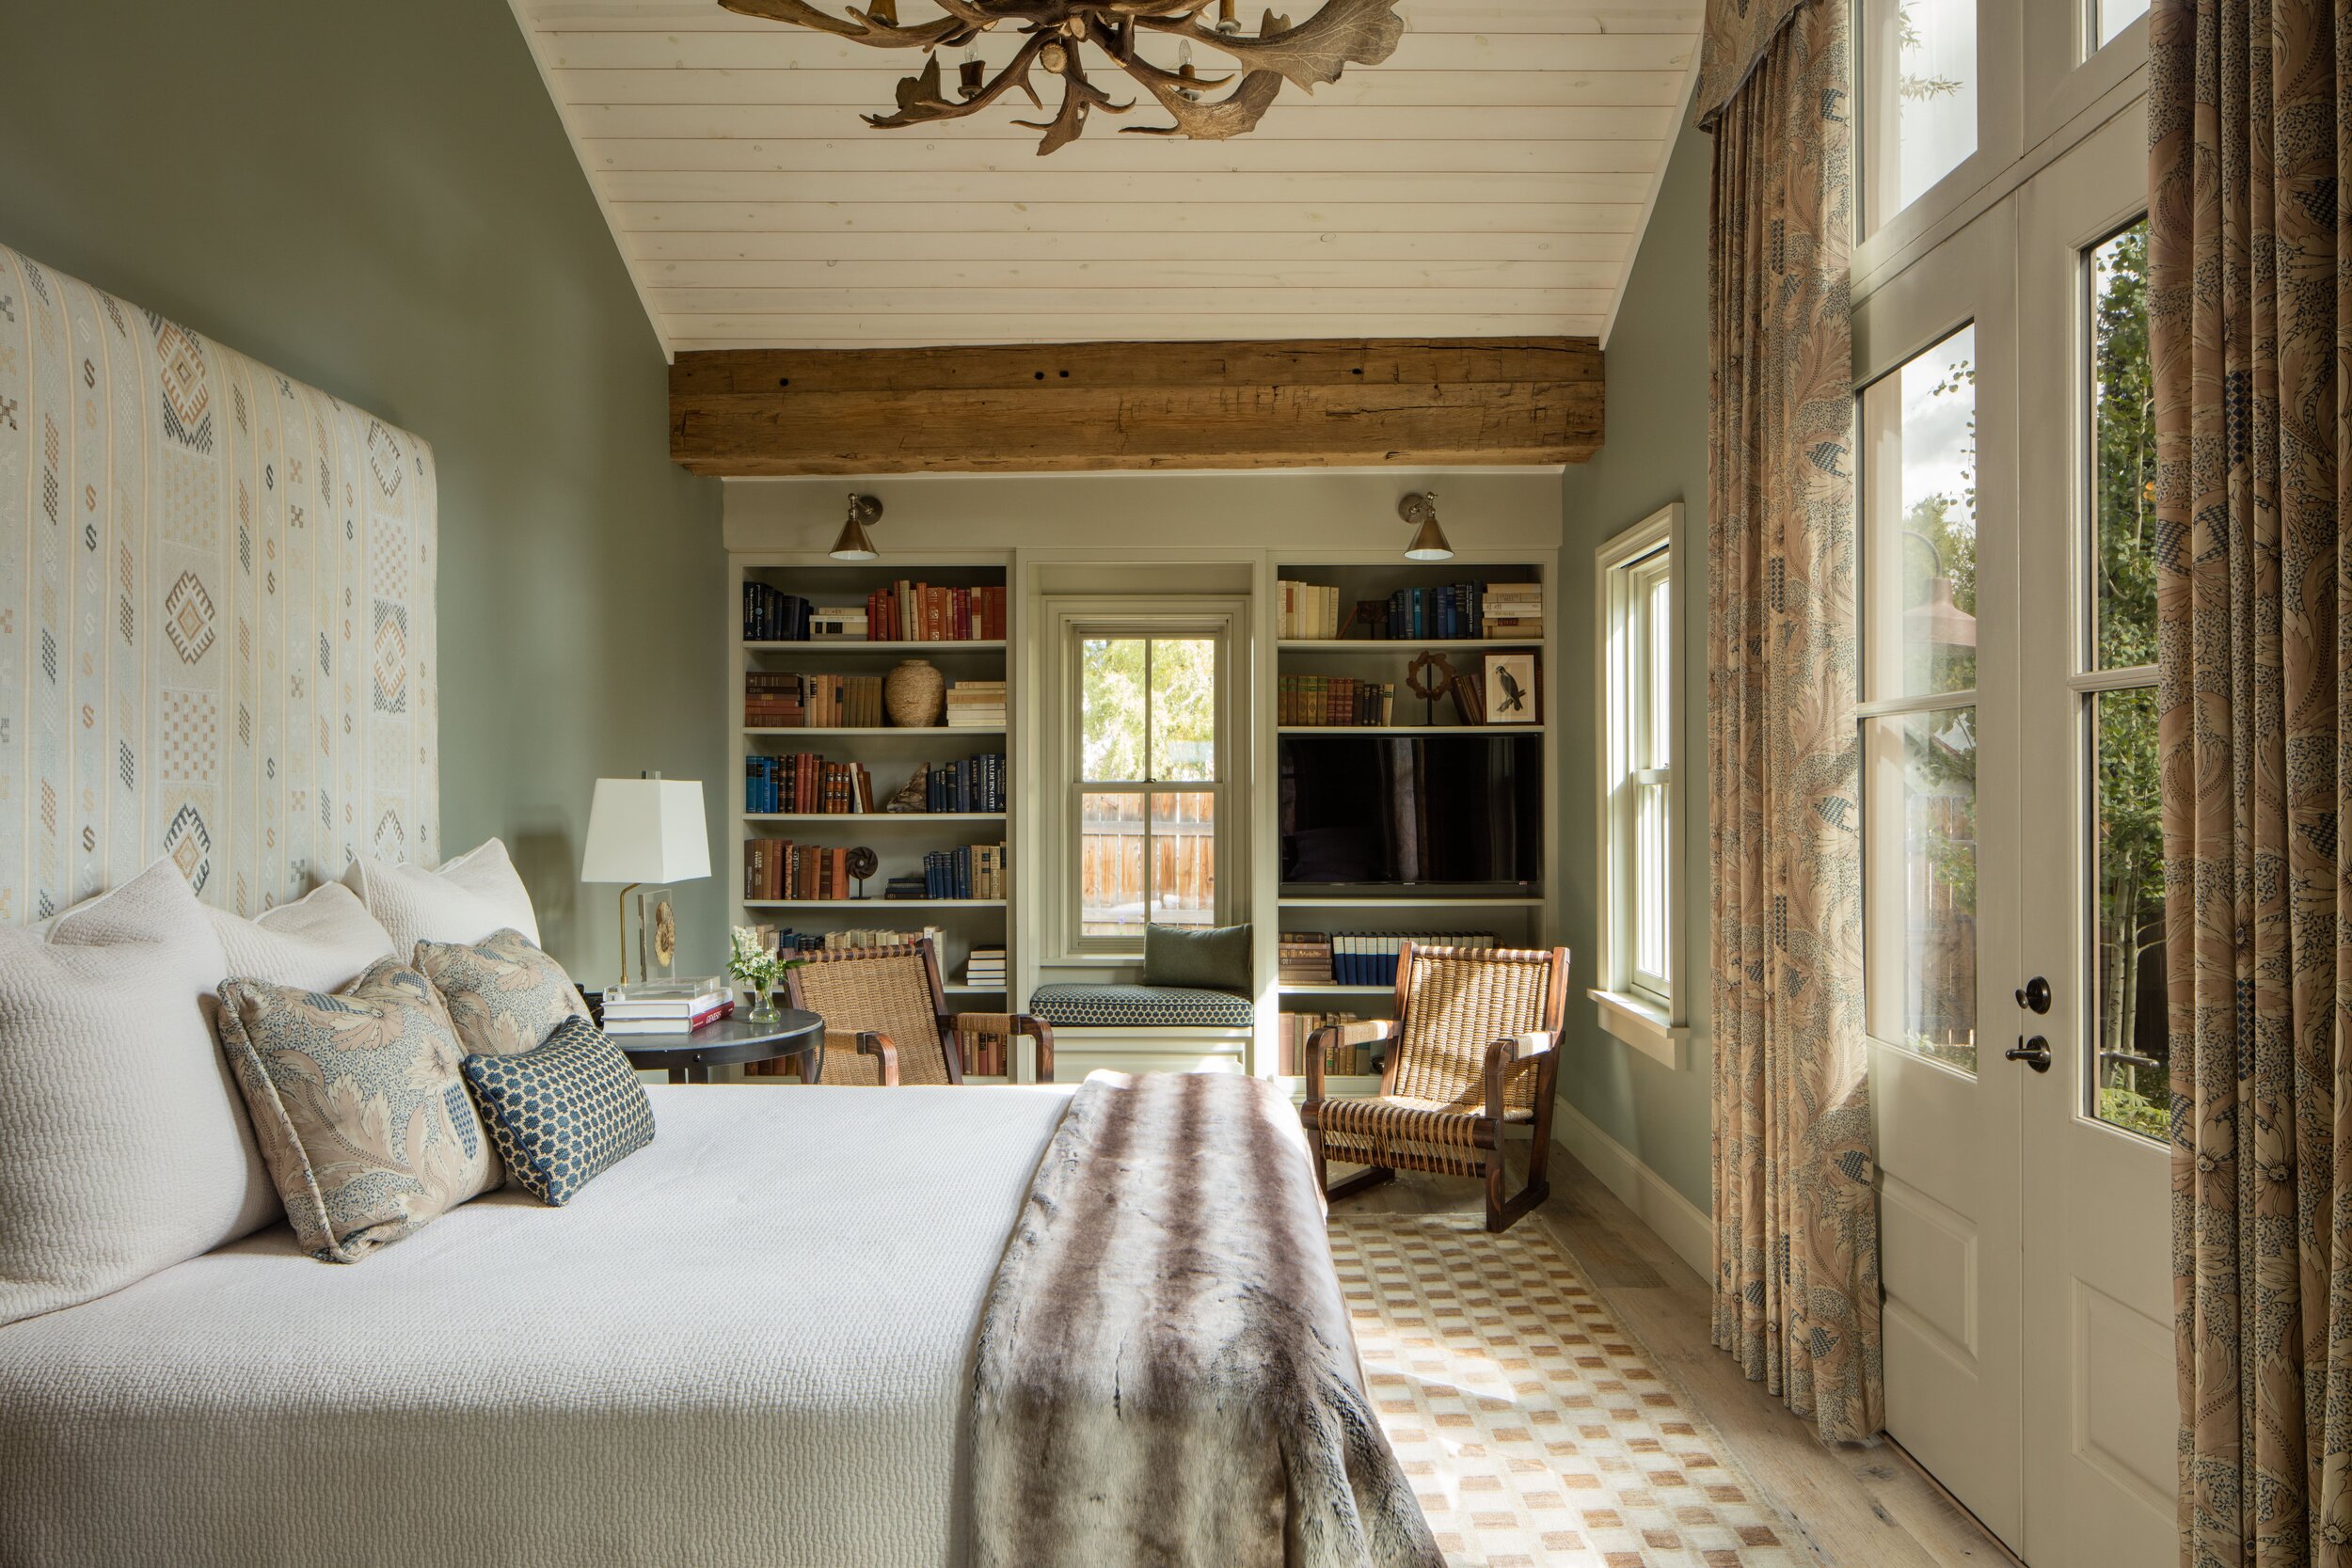   One of the bedrooms in Sopris House (photo credit: Eleven Experience)  